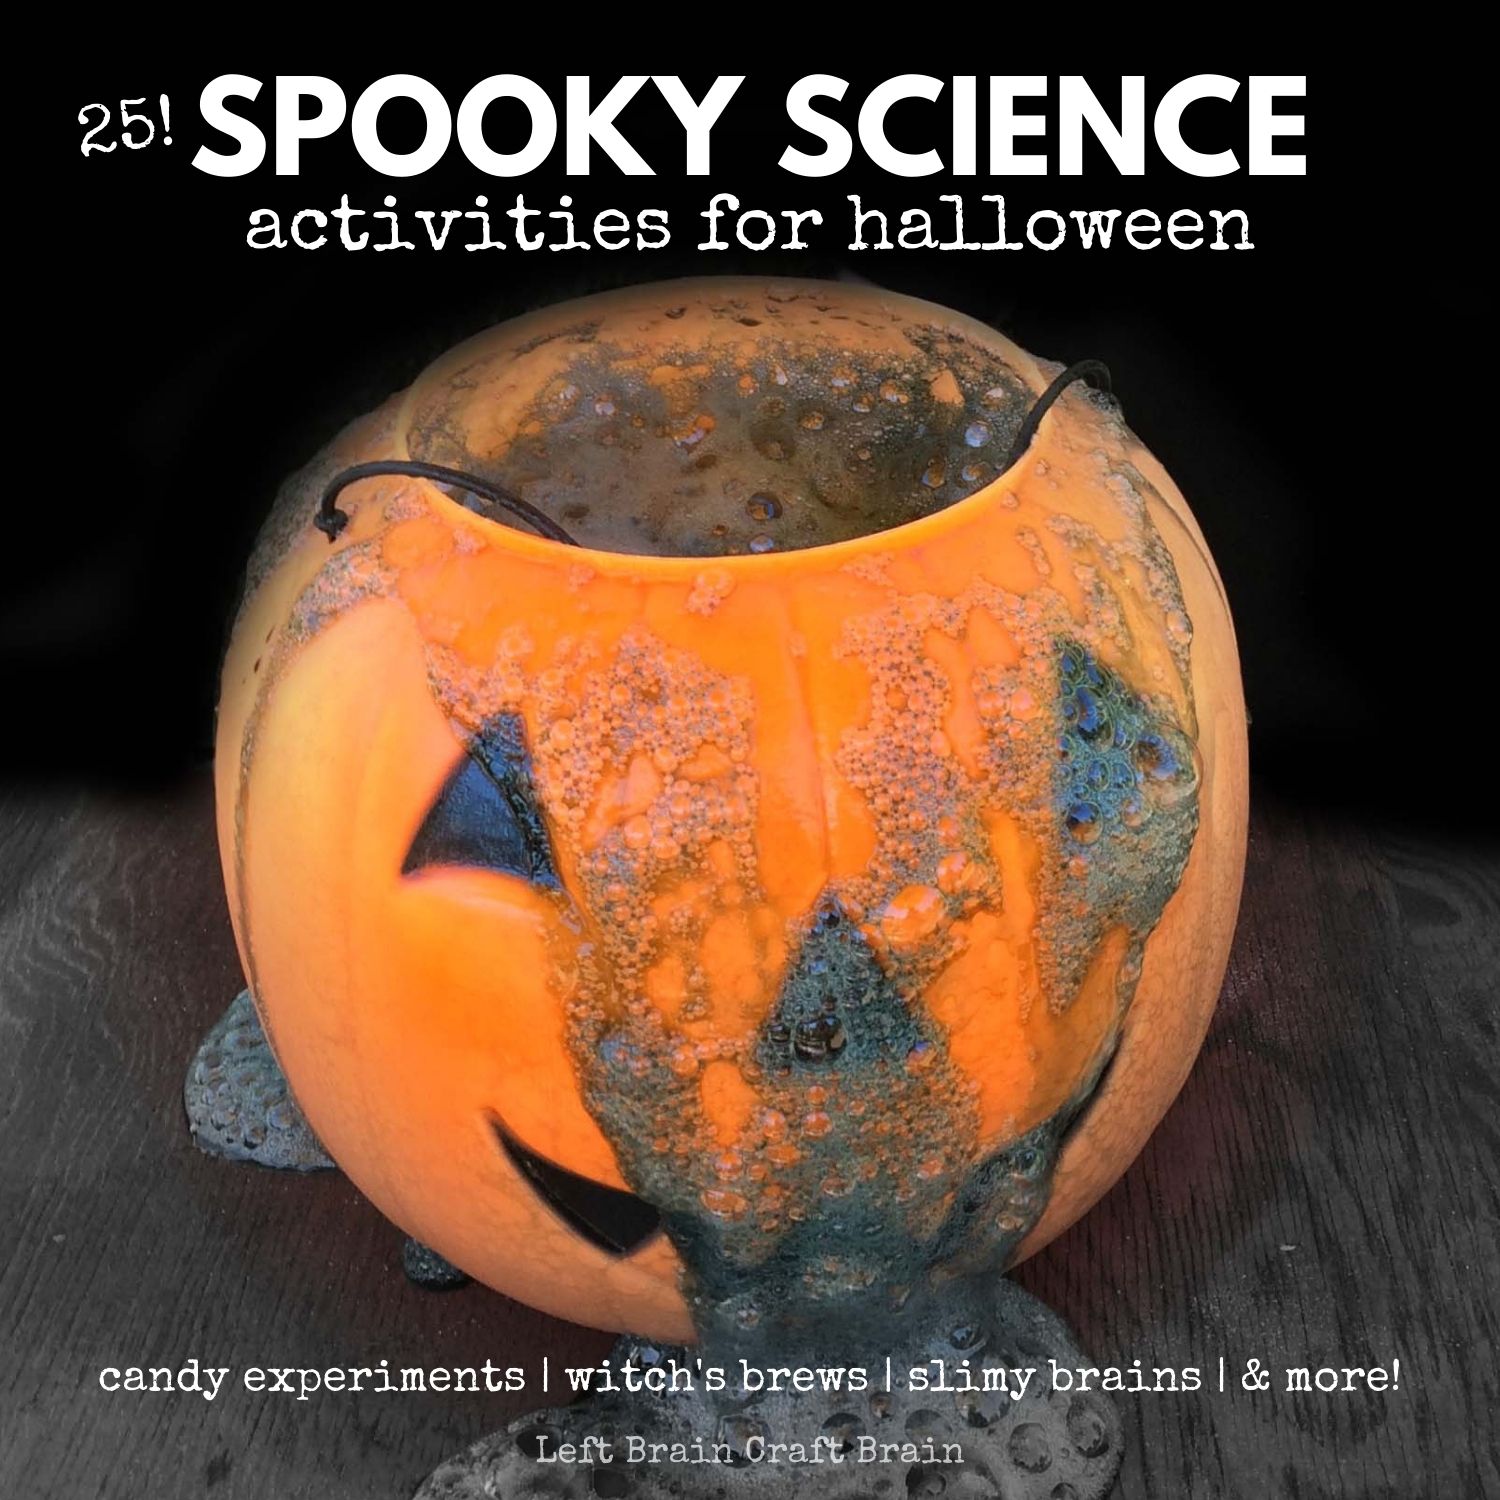 Pumpkins and witches and mad scientists, oh my! It's 25 Spooky Science Activities for Halloween. This huge list of halloween science experiments is perfect for parties or just after school fun for the kids.